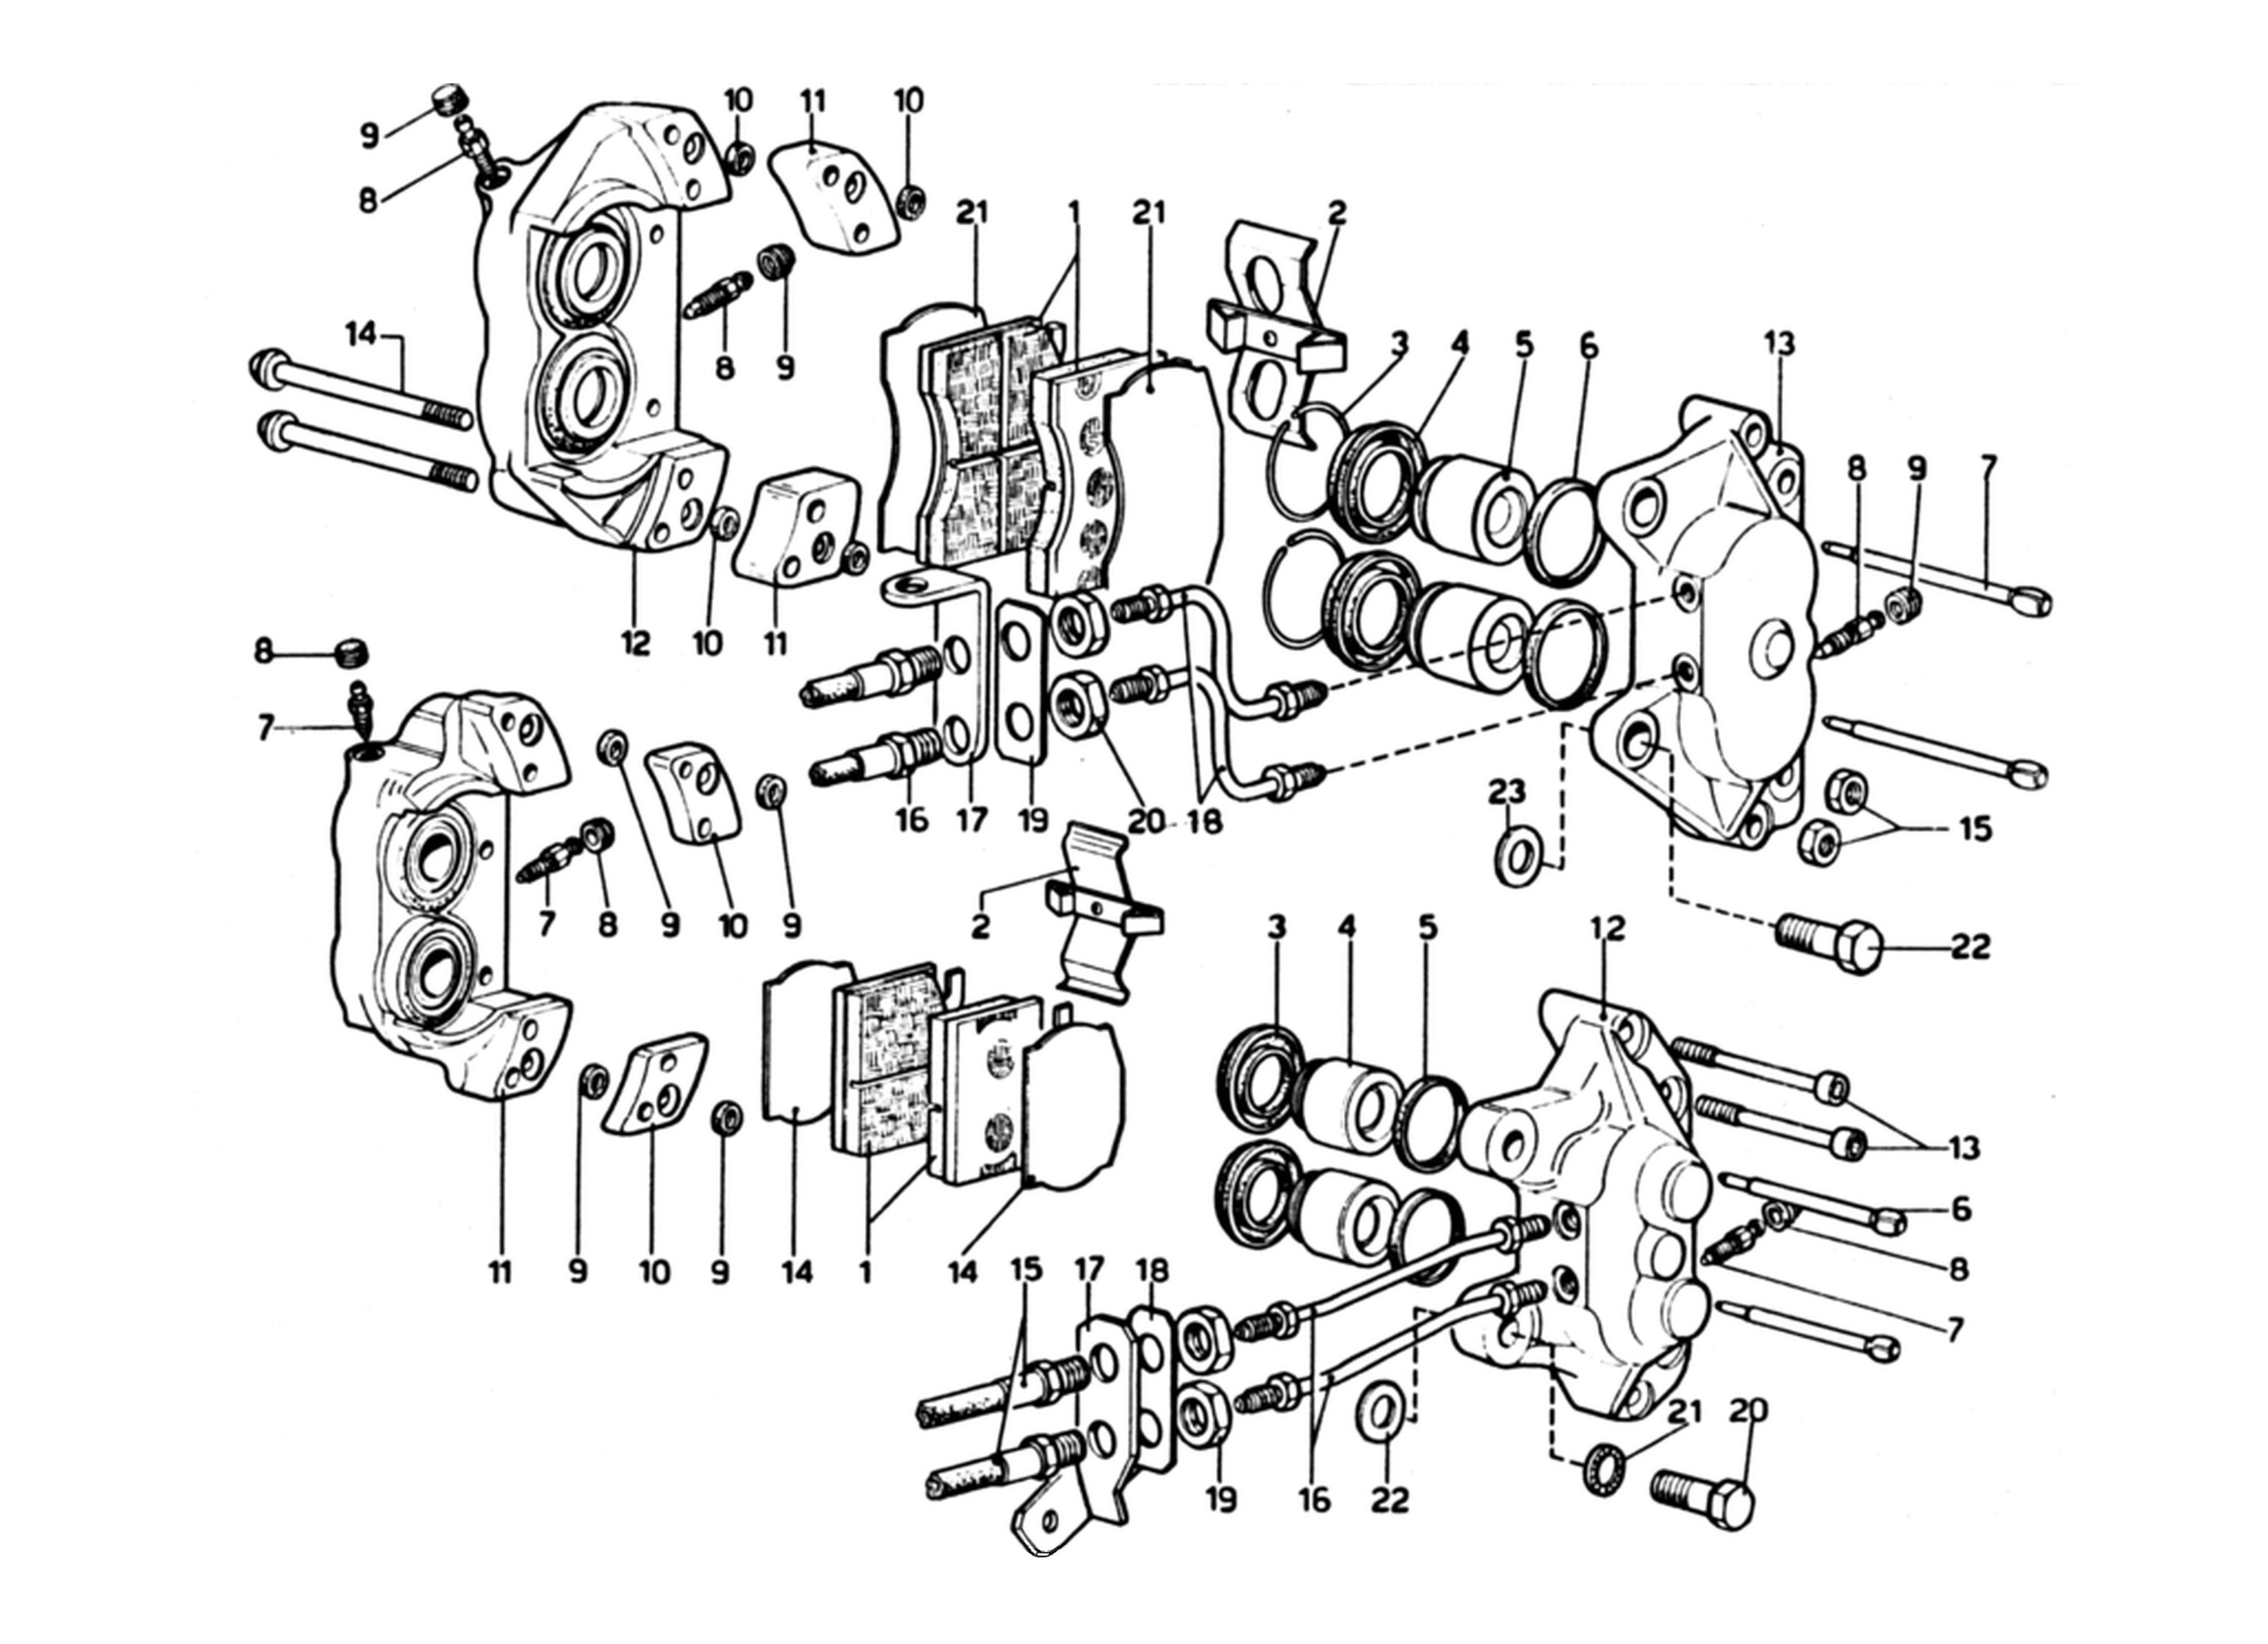 Schematic: Front & Rear Brake Calipers